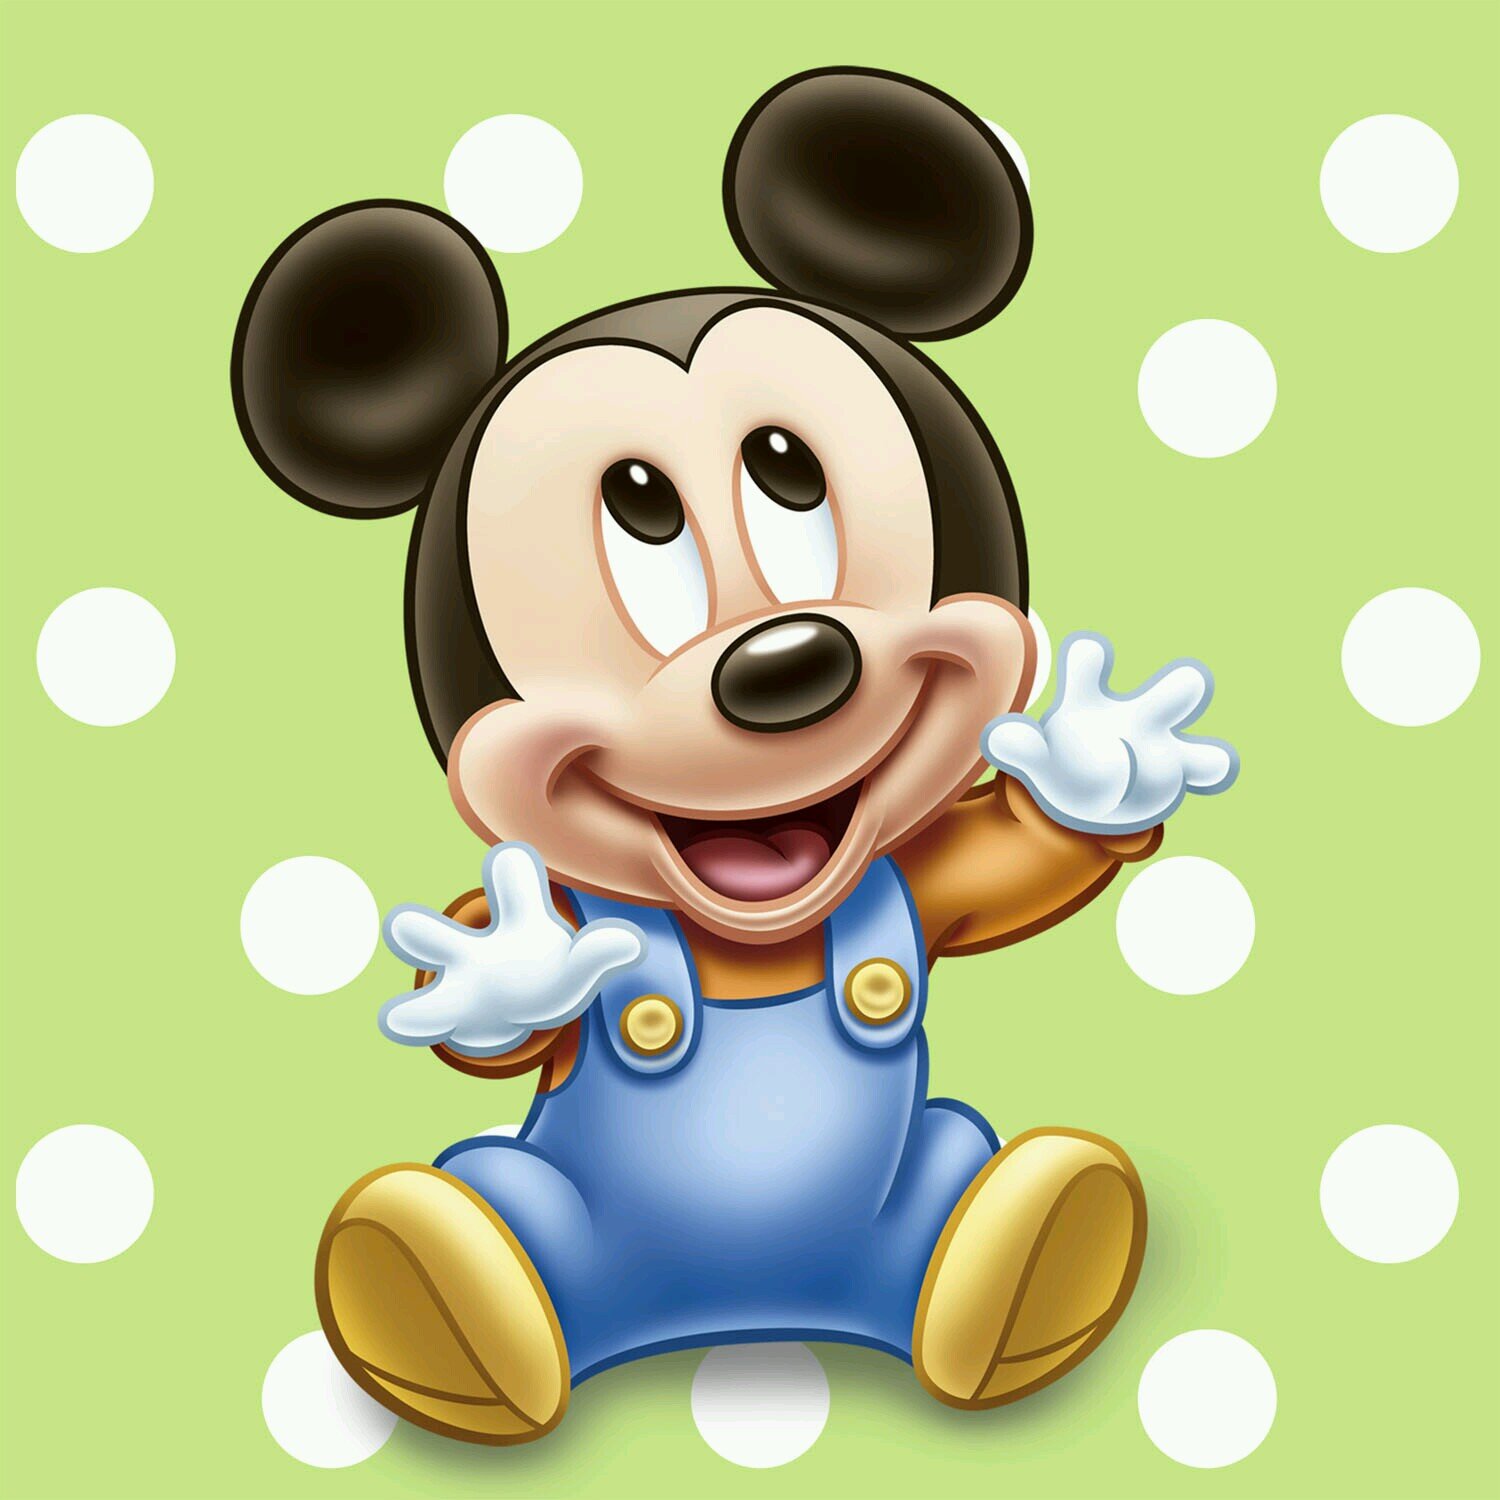 Welcome To Disney Studio ☆ A Base Agency For DisneyStudio ☆ Rules & To Join Please Check Our Website.